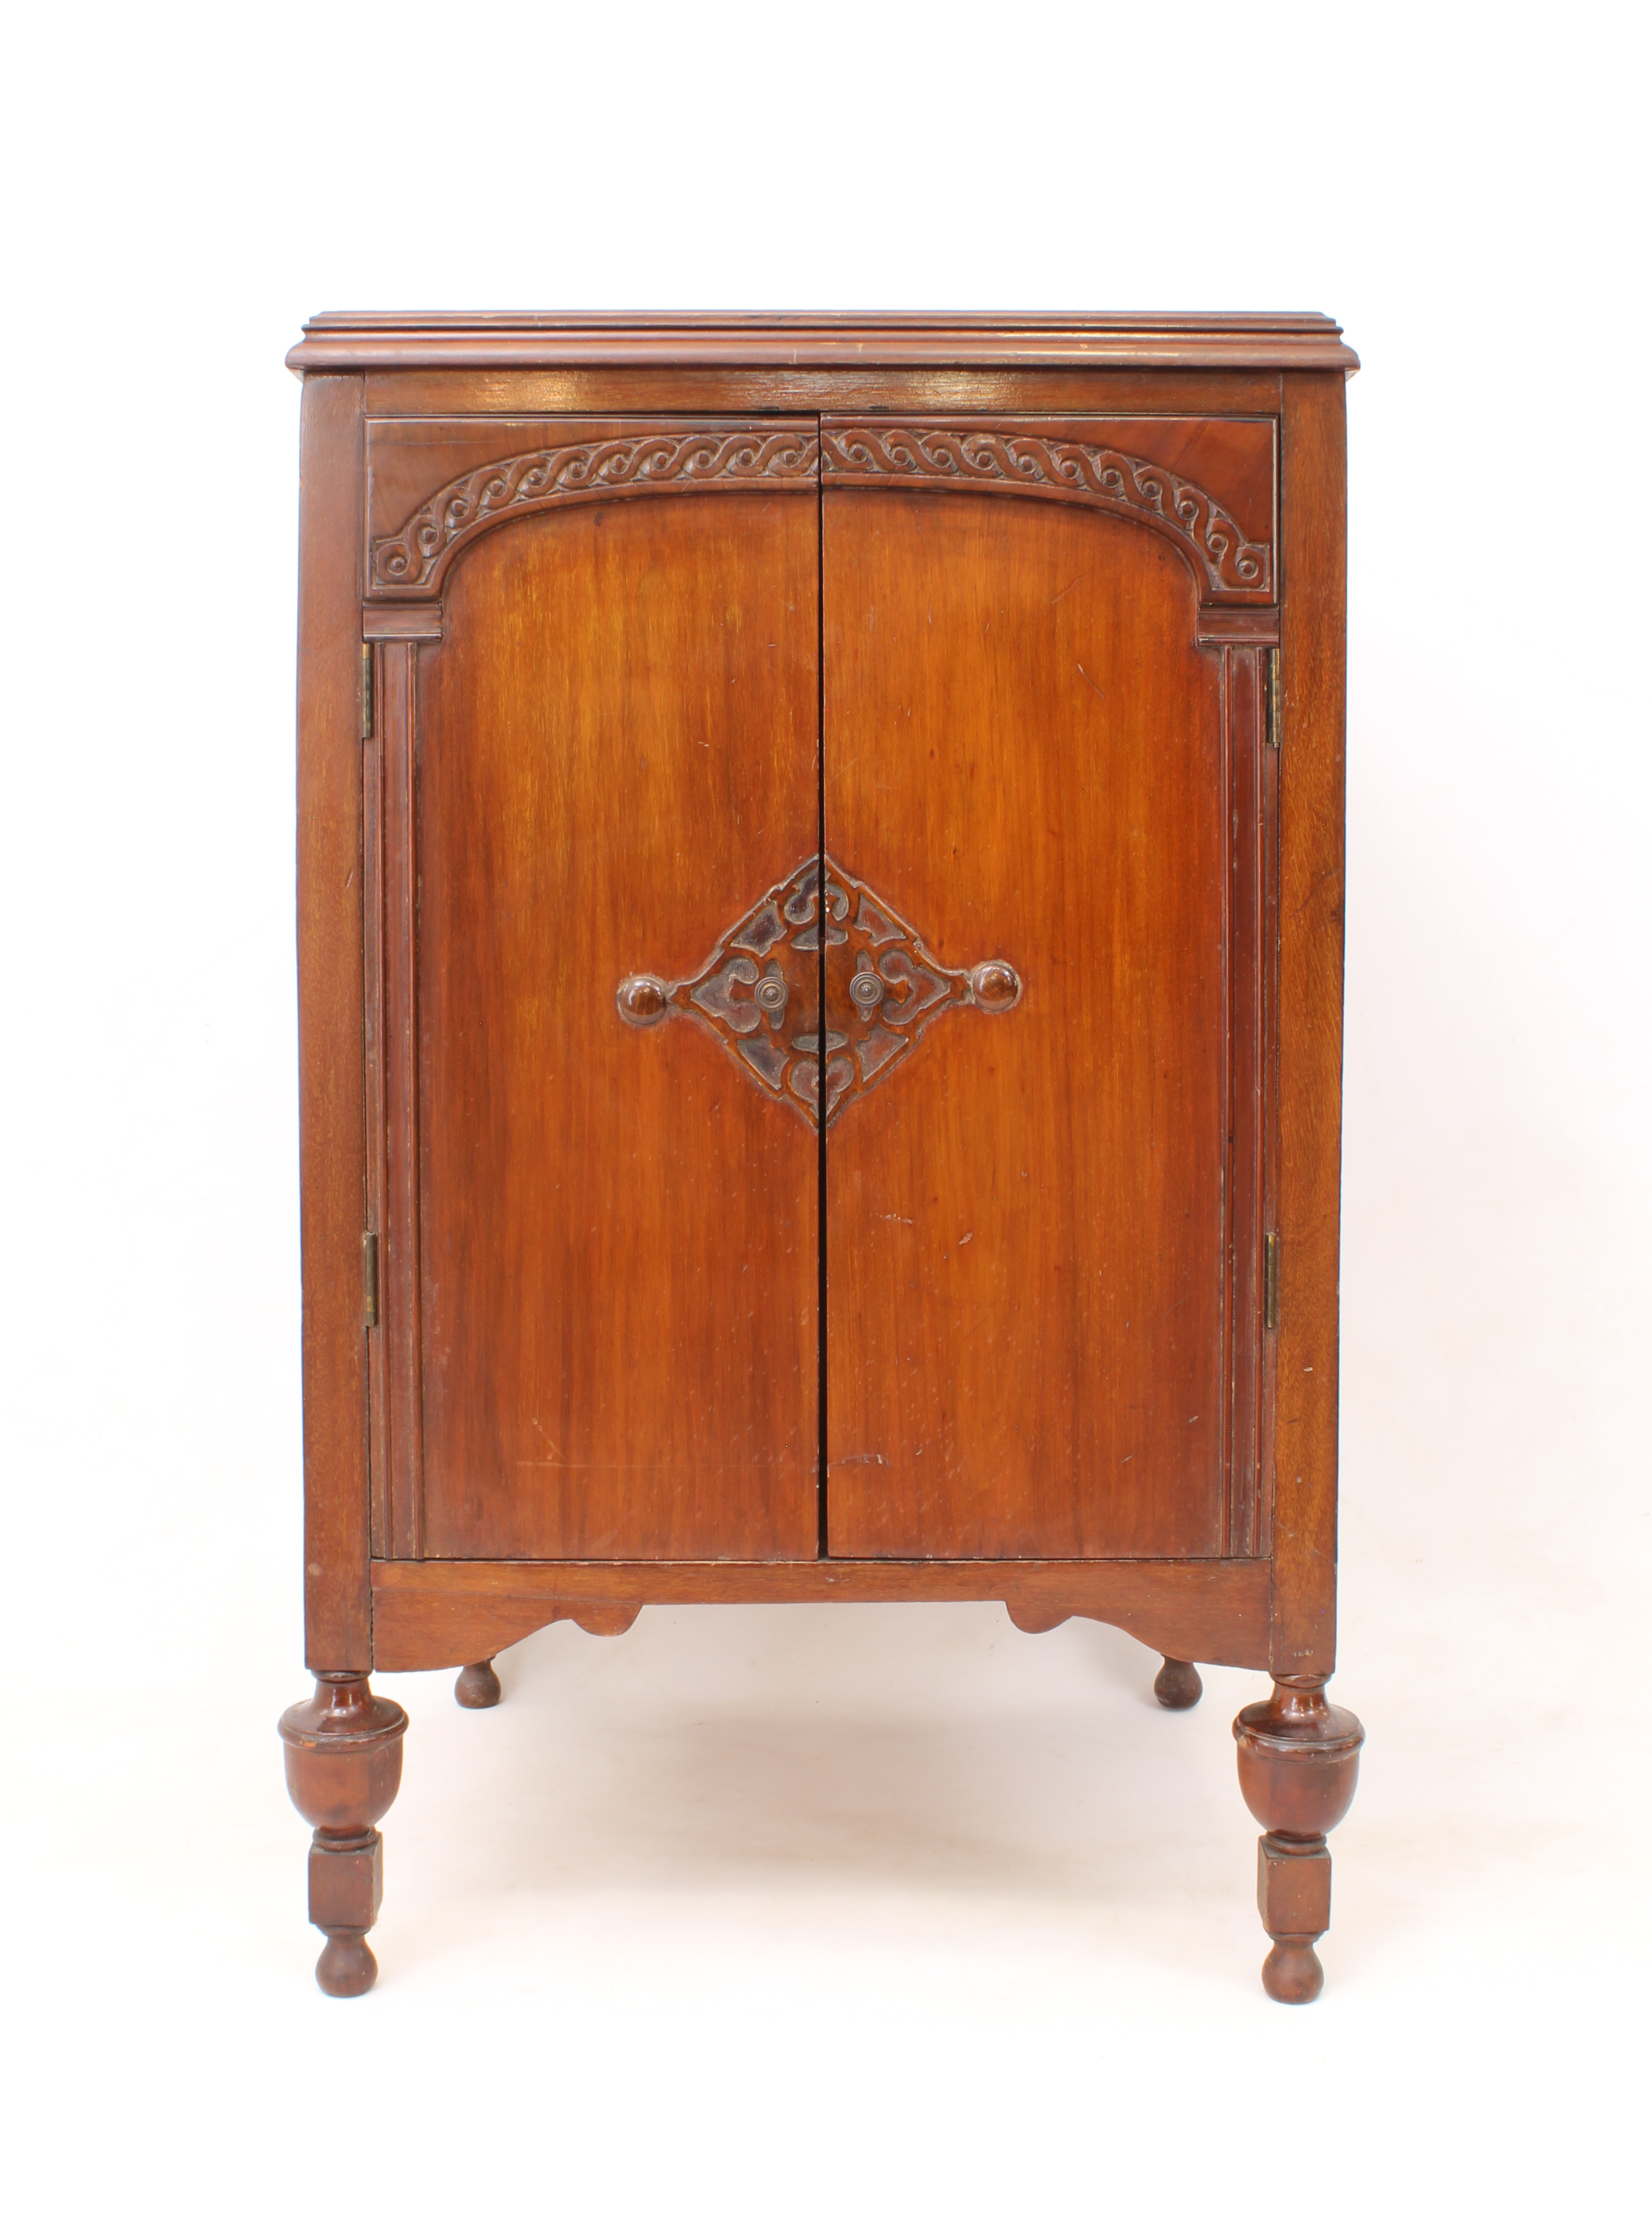 A 1920s-30s mahogany two-door record cabinet - the moulded top over a pair of doors carved with